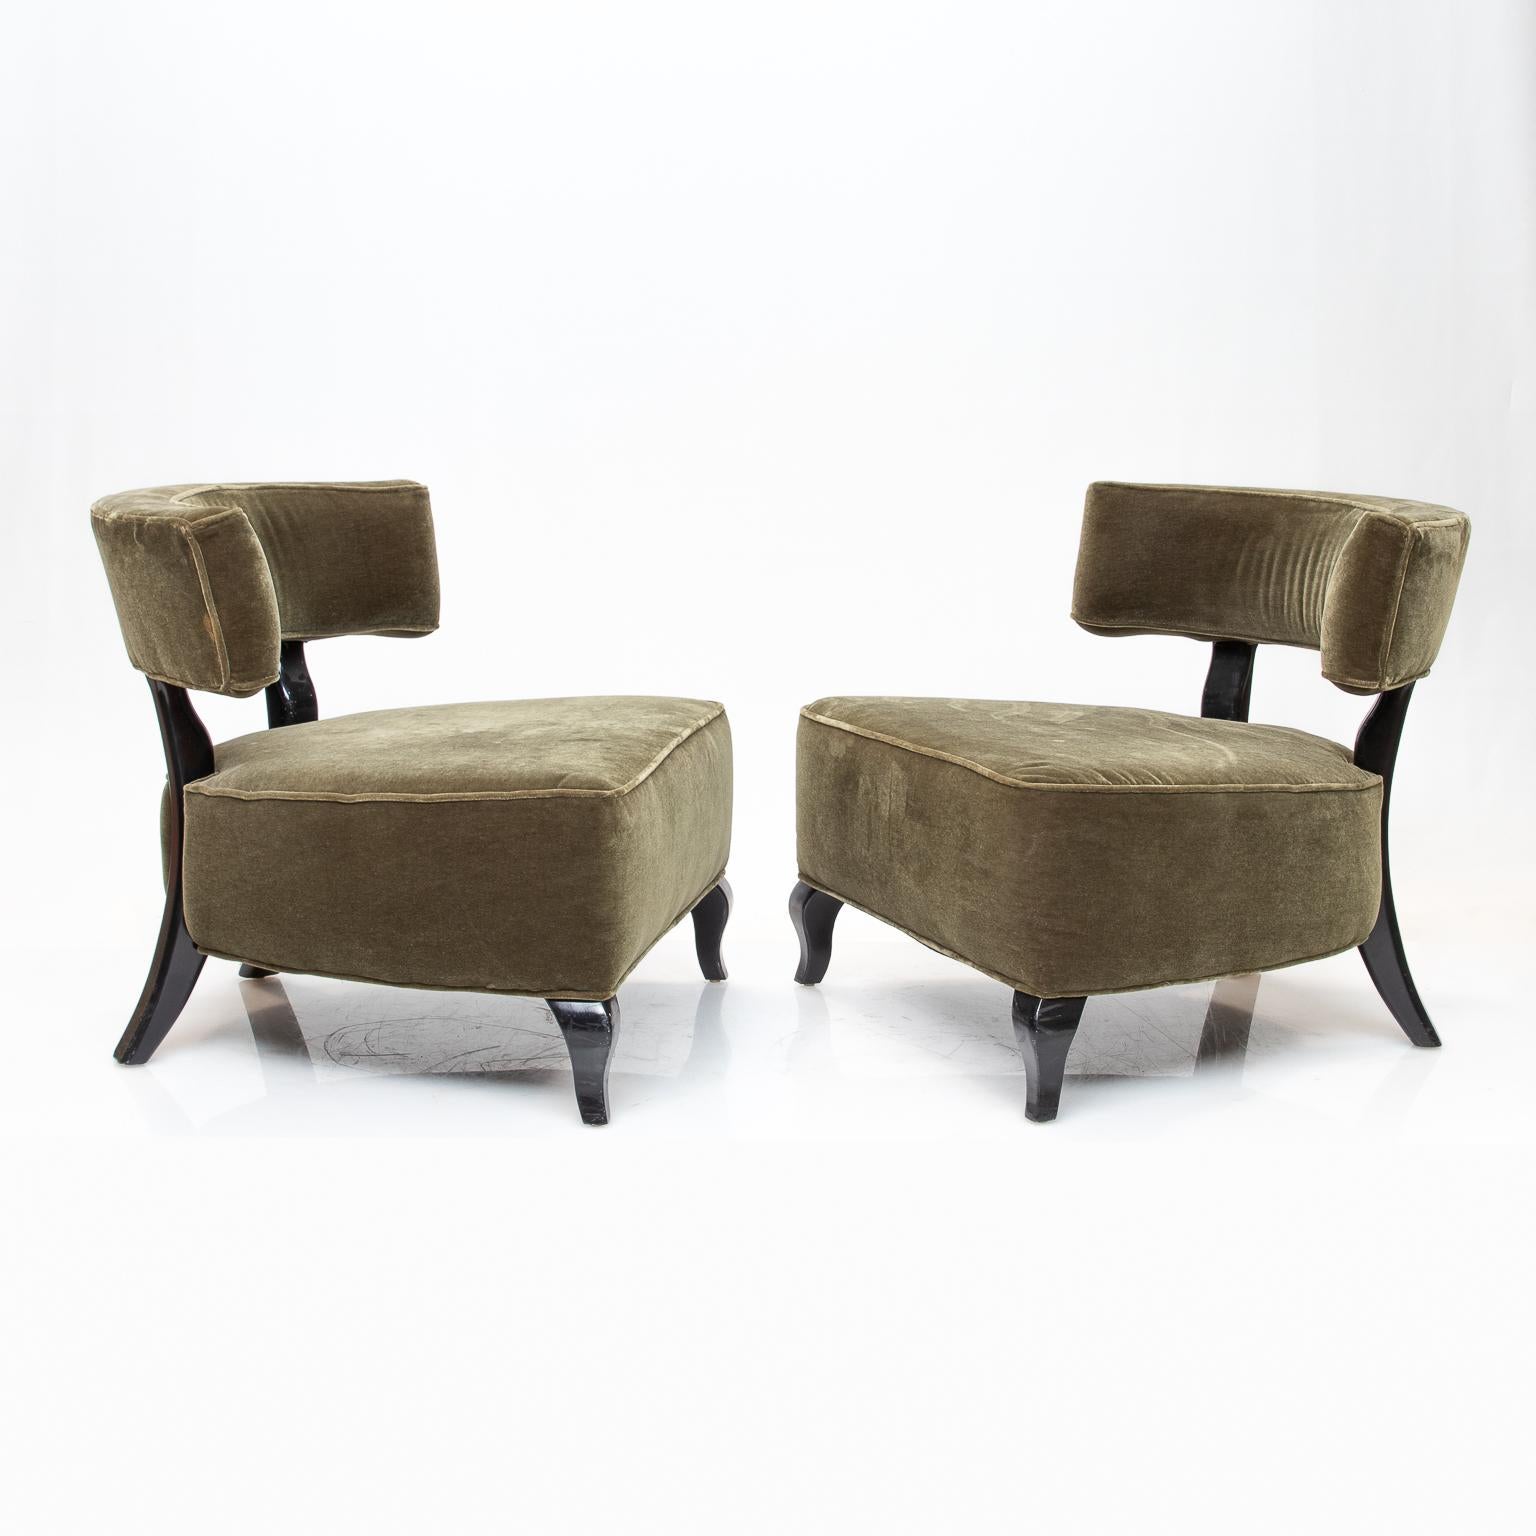 A pair of large Deco chairs in a light green mohair upholstery and black lacquered exposed wood. These chairs are very comfortable and big in appearance.